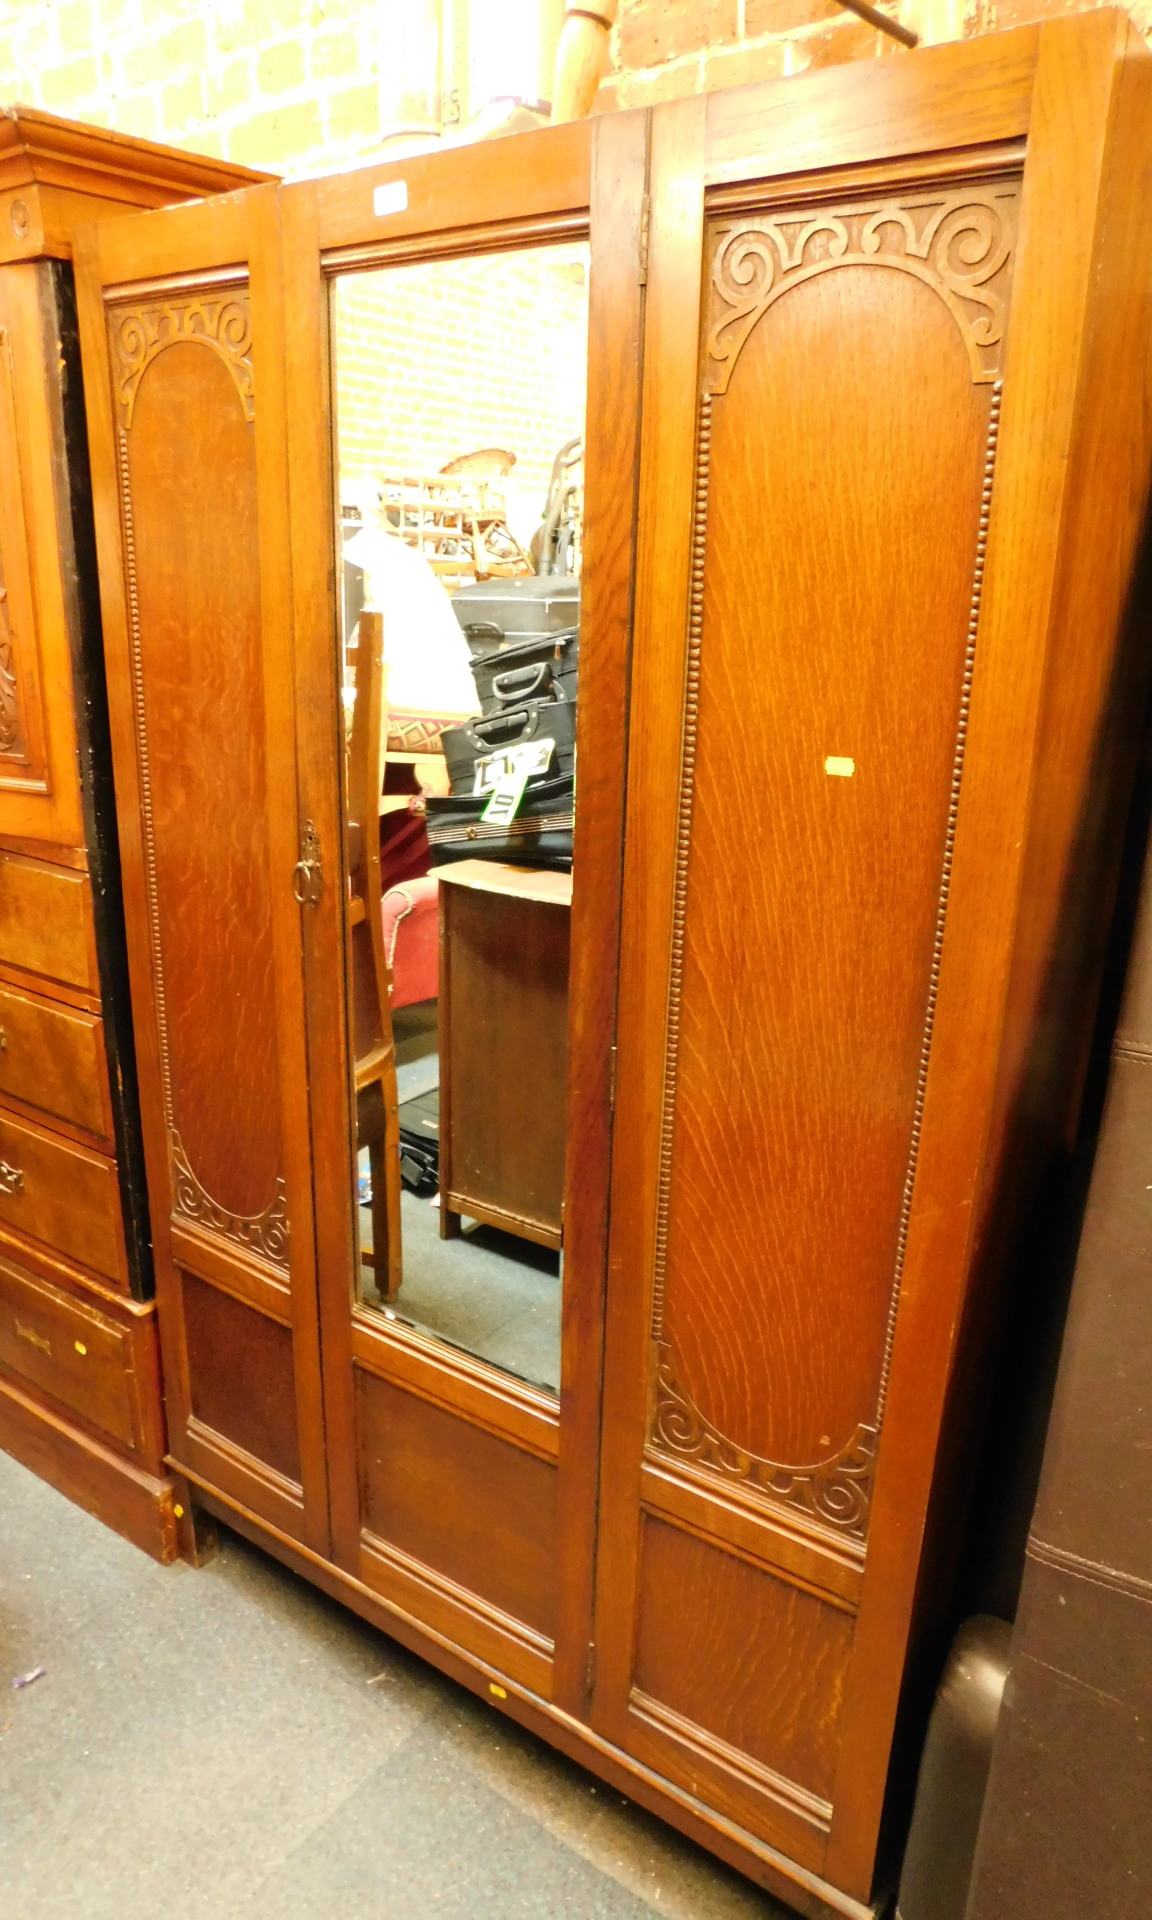 An Edwardian carved oak wardrobe, with single glazed door and two carved panels, on tapered legs.